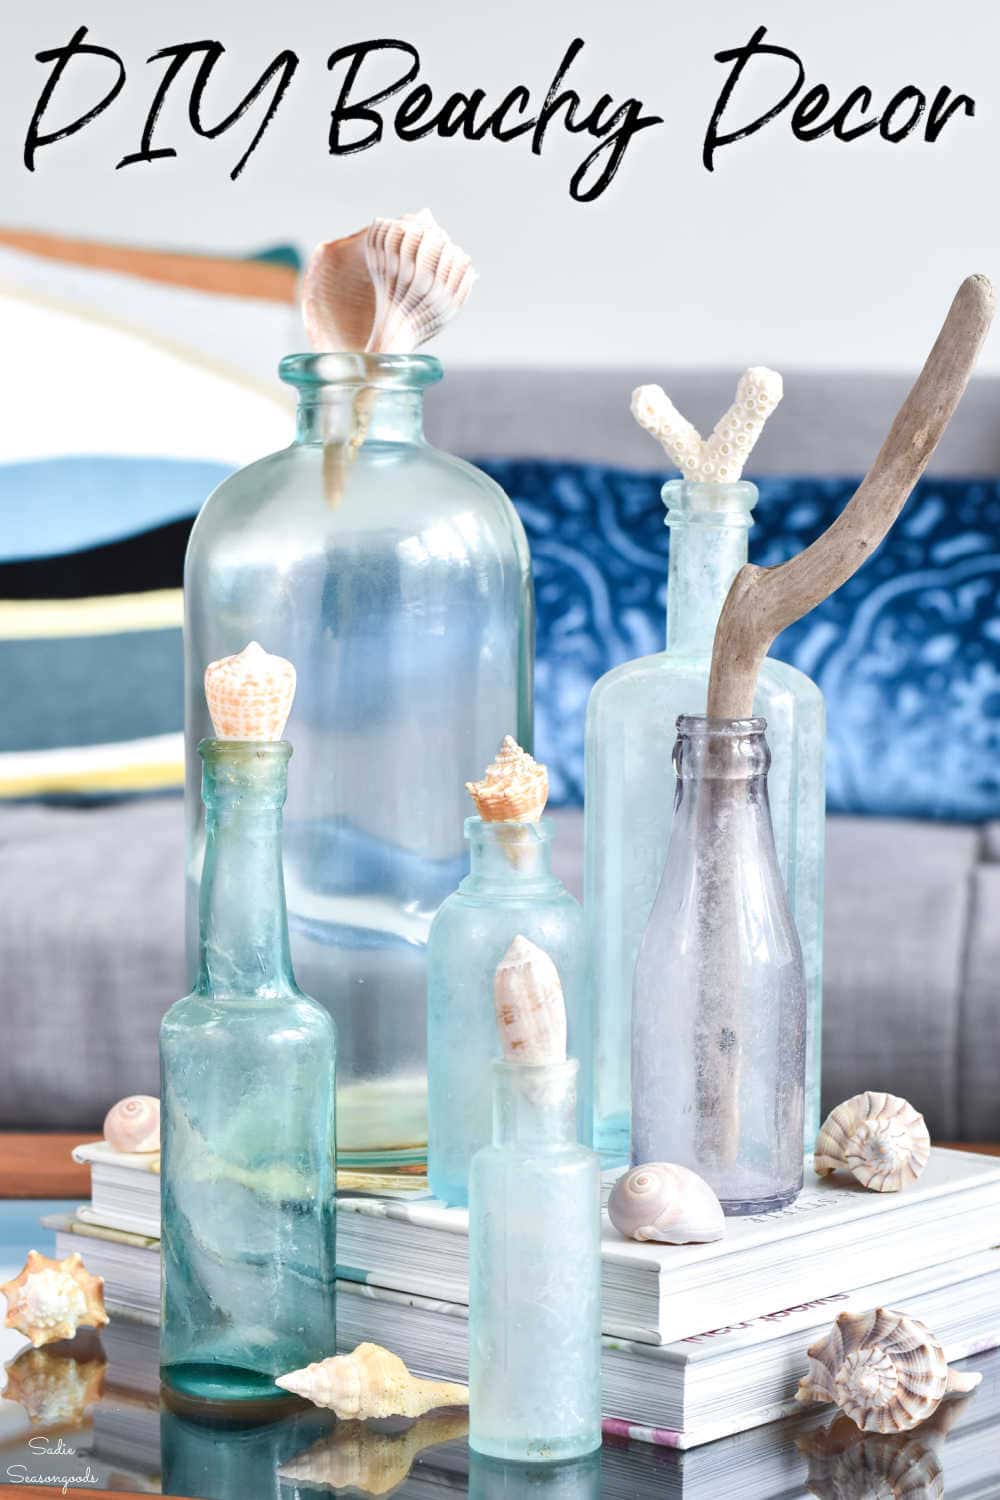 coastal crafts and decor projects